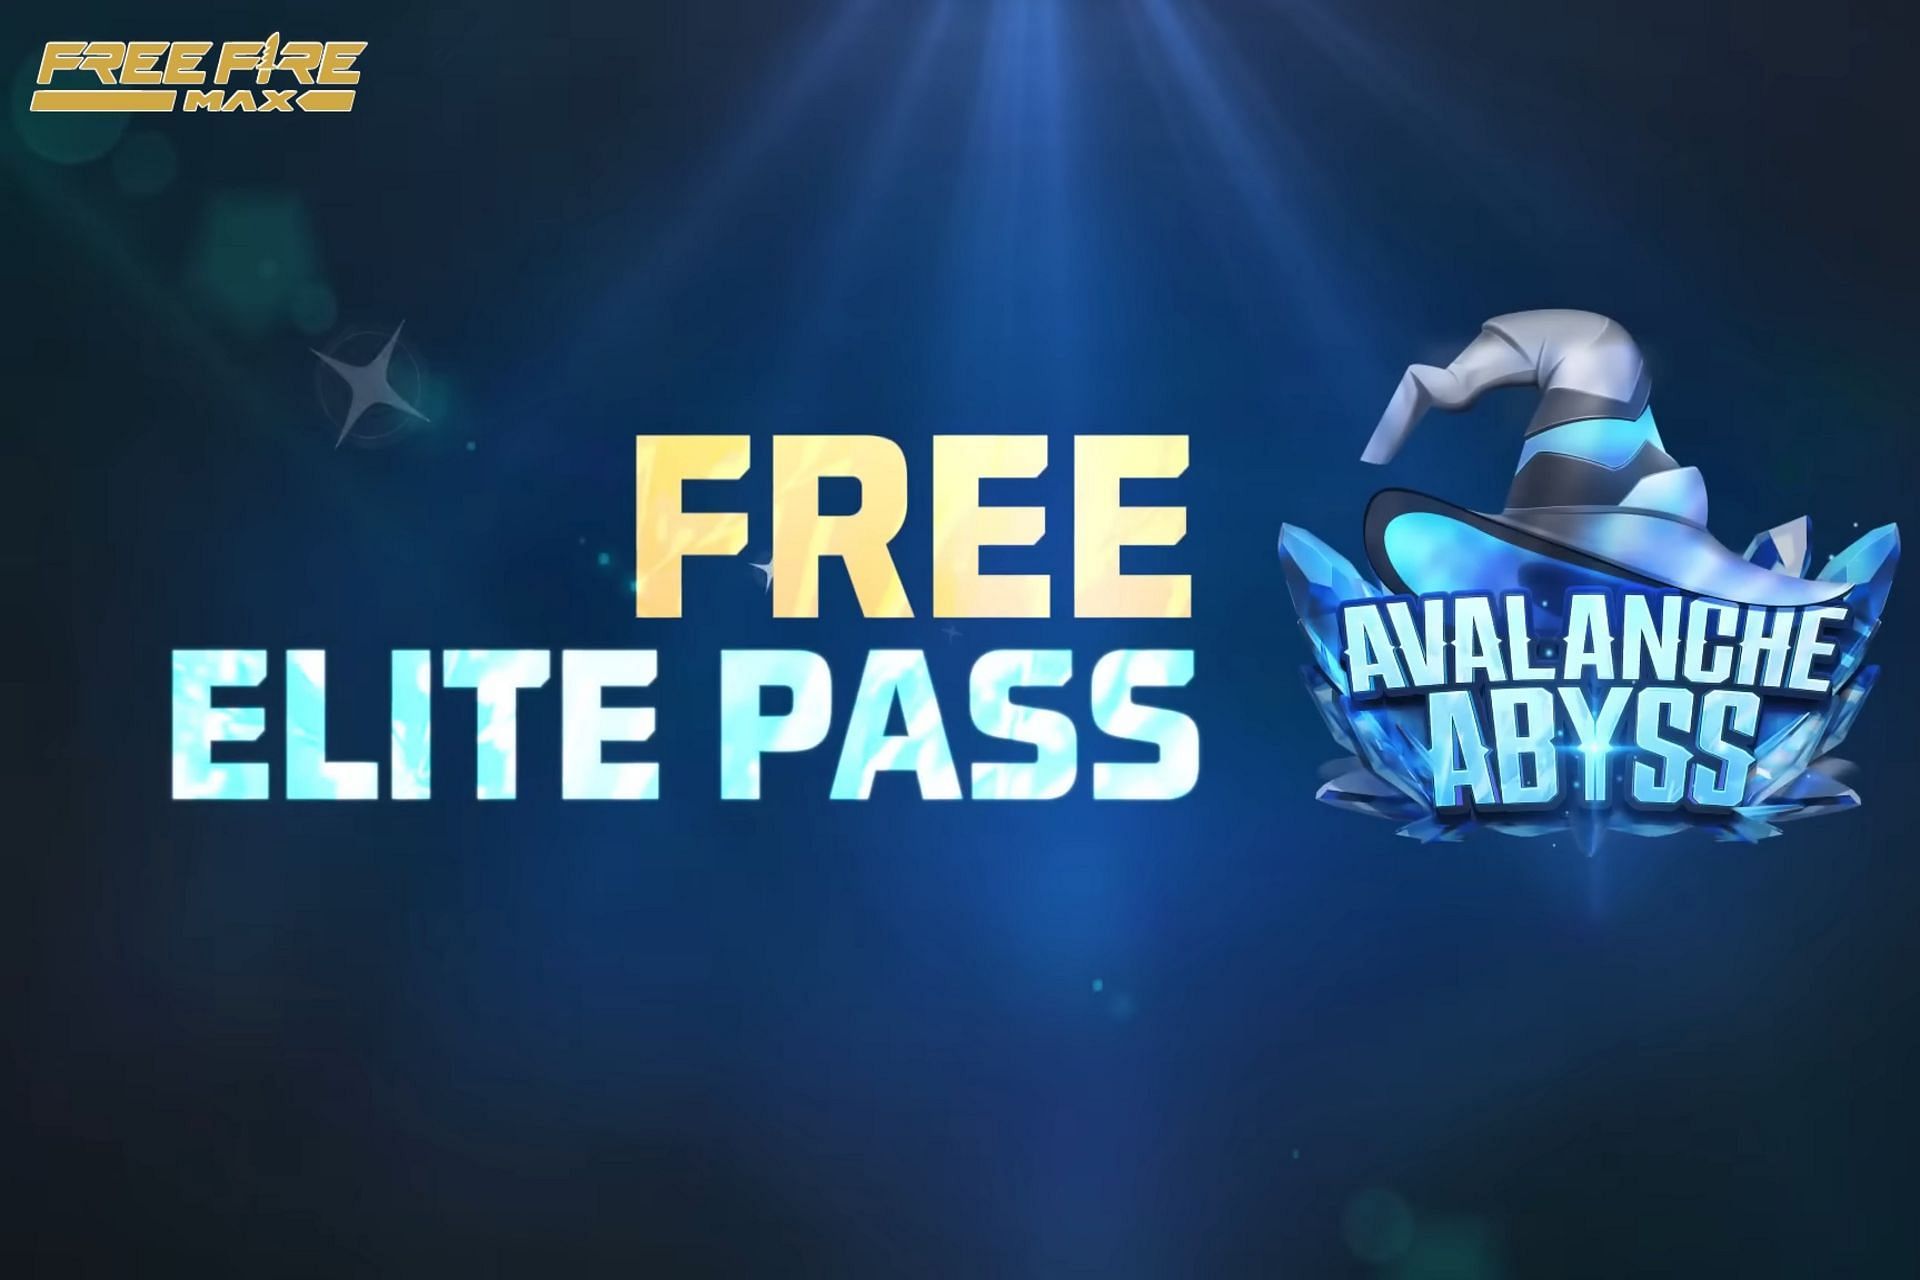 Players will get December 2022 Elite Pass &quot;Avalanche Abyss&quot; for free in the game (Image via Garena)